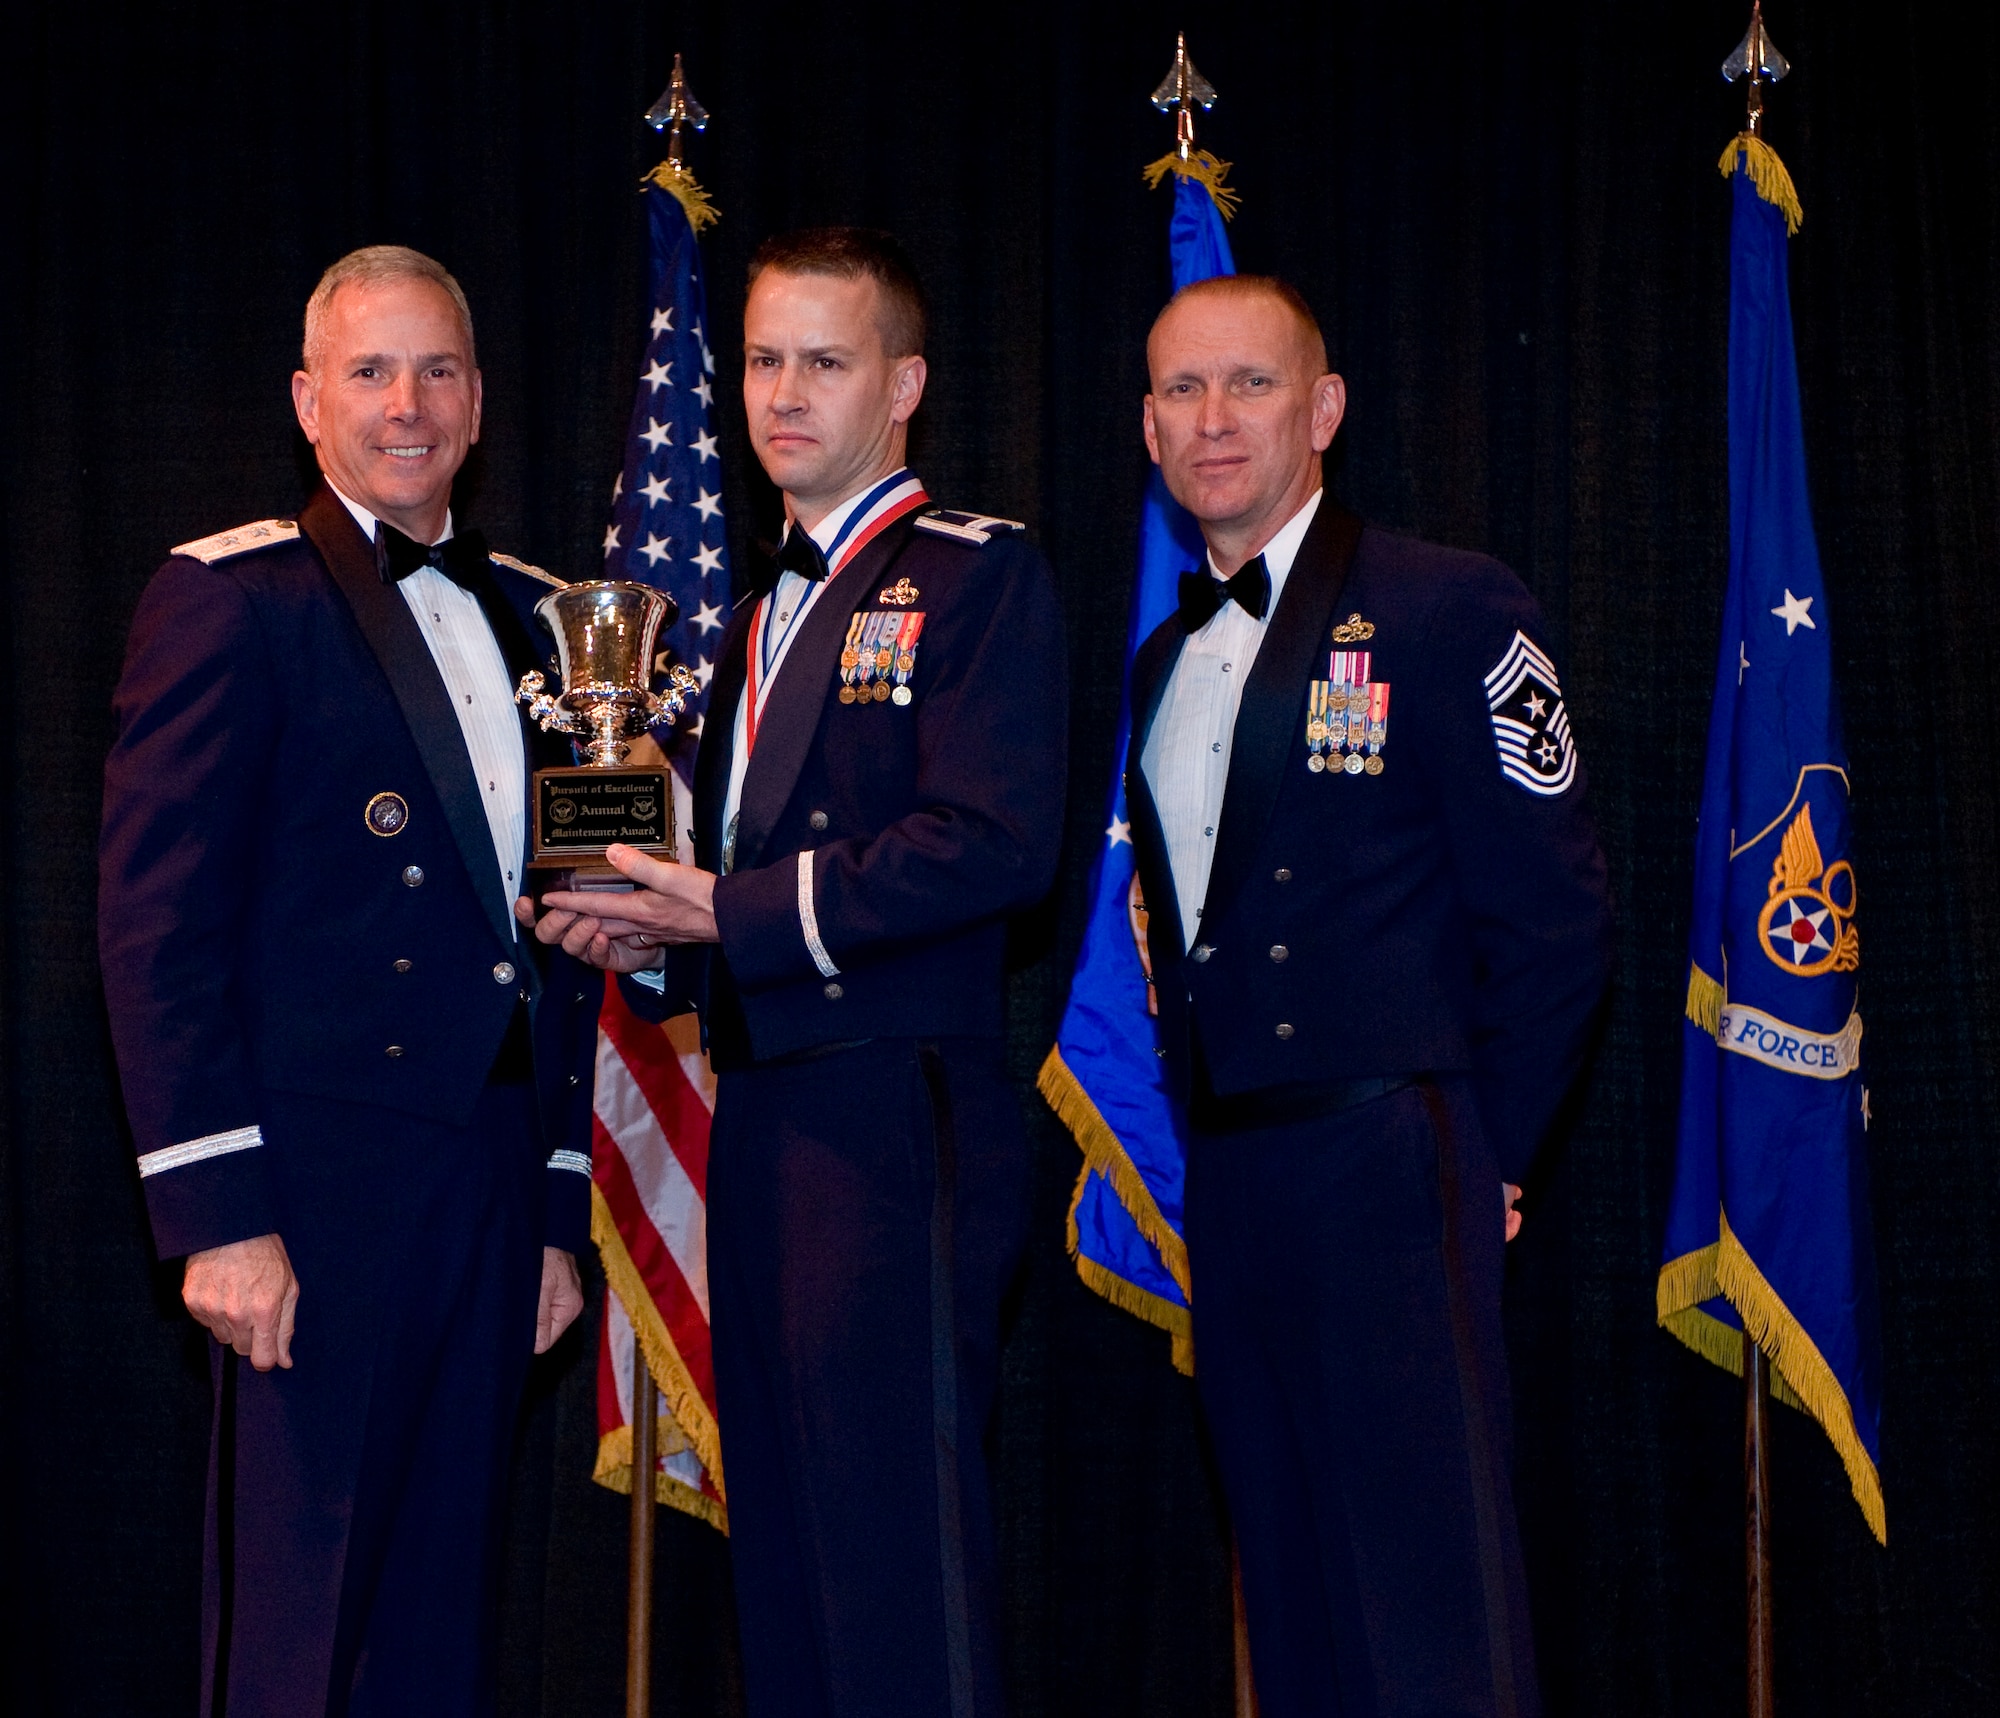 SHREVEPORT, La. -- Two 5th Bomb Wing Airmen received Eighth Air Force Outstanding Airmen of the Year awards for 2010 at a gala event held at the Eldorado Resort and Casino in Shreveport, La., on March 3. Tech. Sgt. Bradley Williams, 5th Logistics Readiness Squadron NCO in charge of dispatch operations, received the award for the Non-Commissioned Officer category. Master Sgt. Robert Dalton Jr., 5th Civil Engineer Squadron section chief of pavements and construction equipment, received the award for the Senior Non-Commissioned Officer category. (U.S. Air Force photo by Senior Airman Chad Warren)



